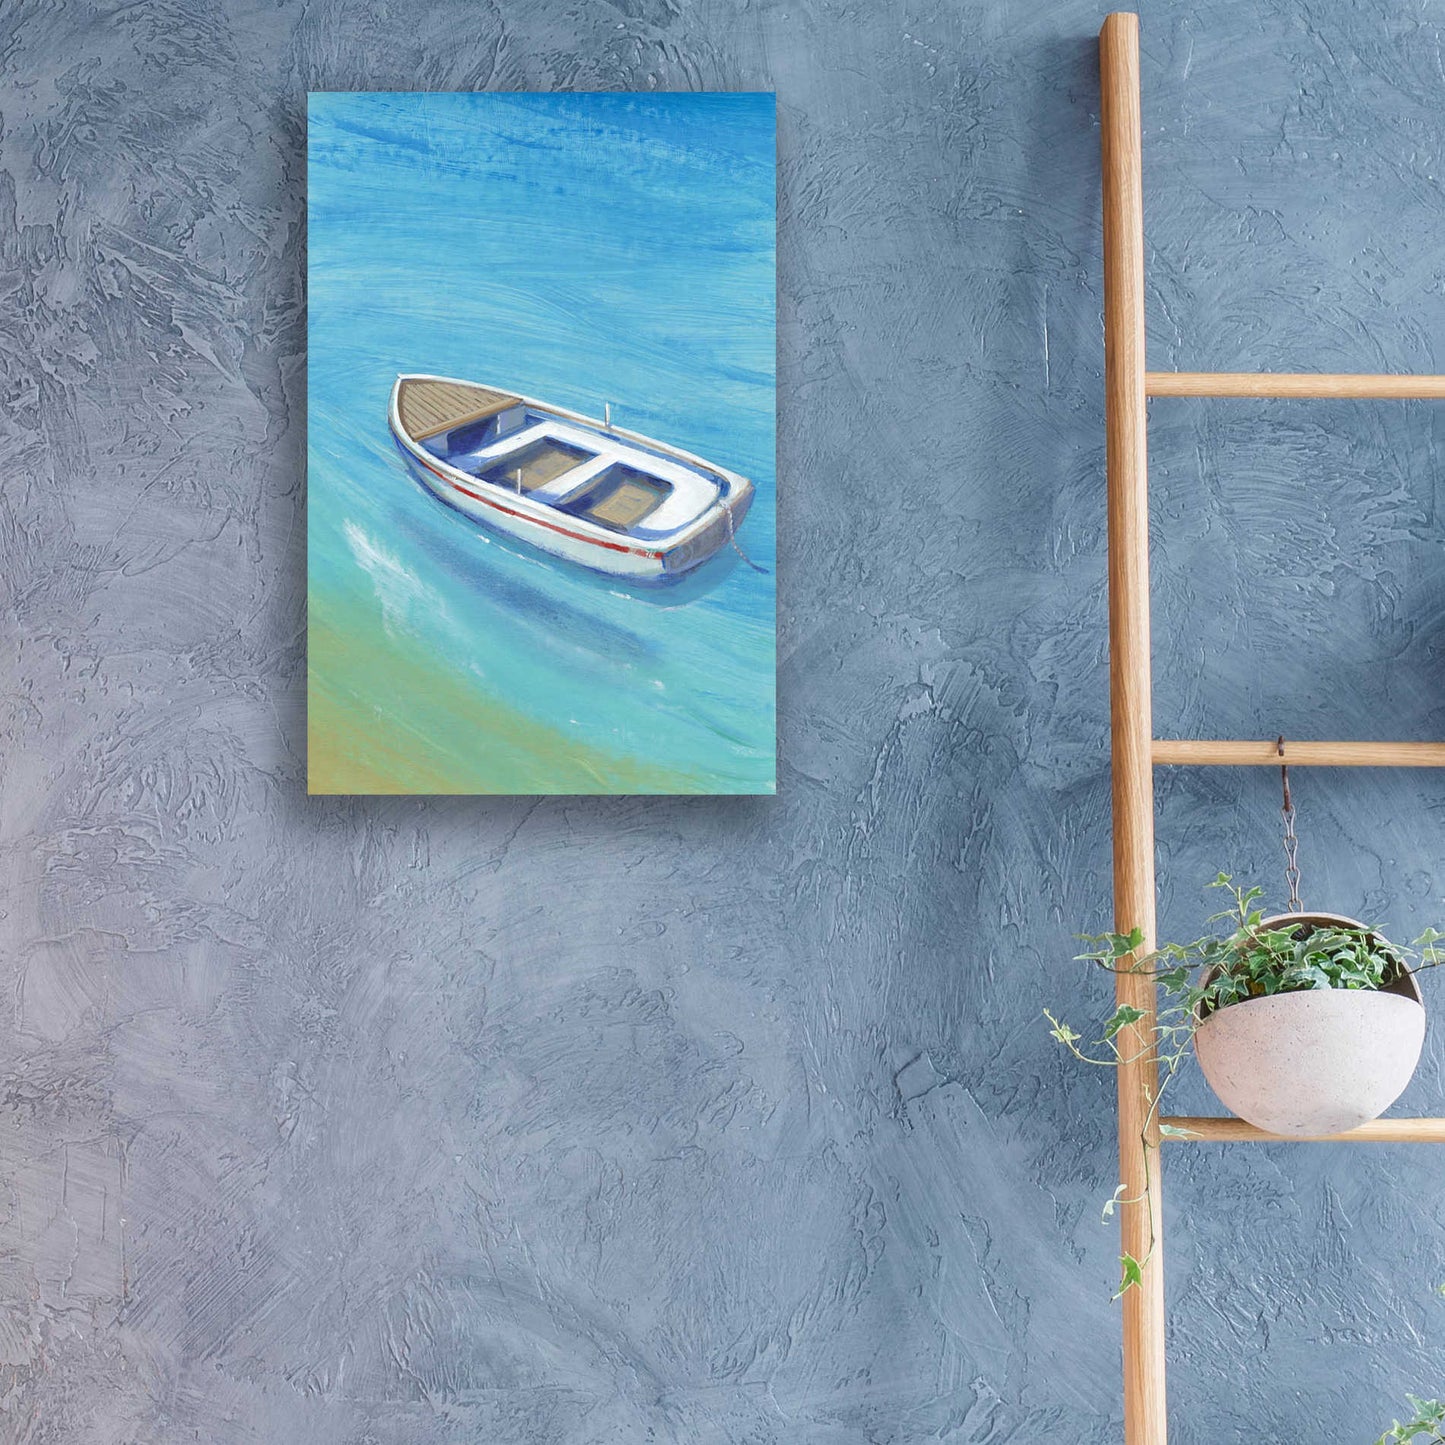 Epic Art 'Anchored Dingy I' by Tim O'Toole, Acrylic Glass Wall Art,16x24